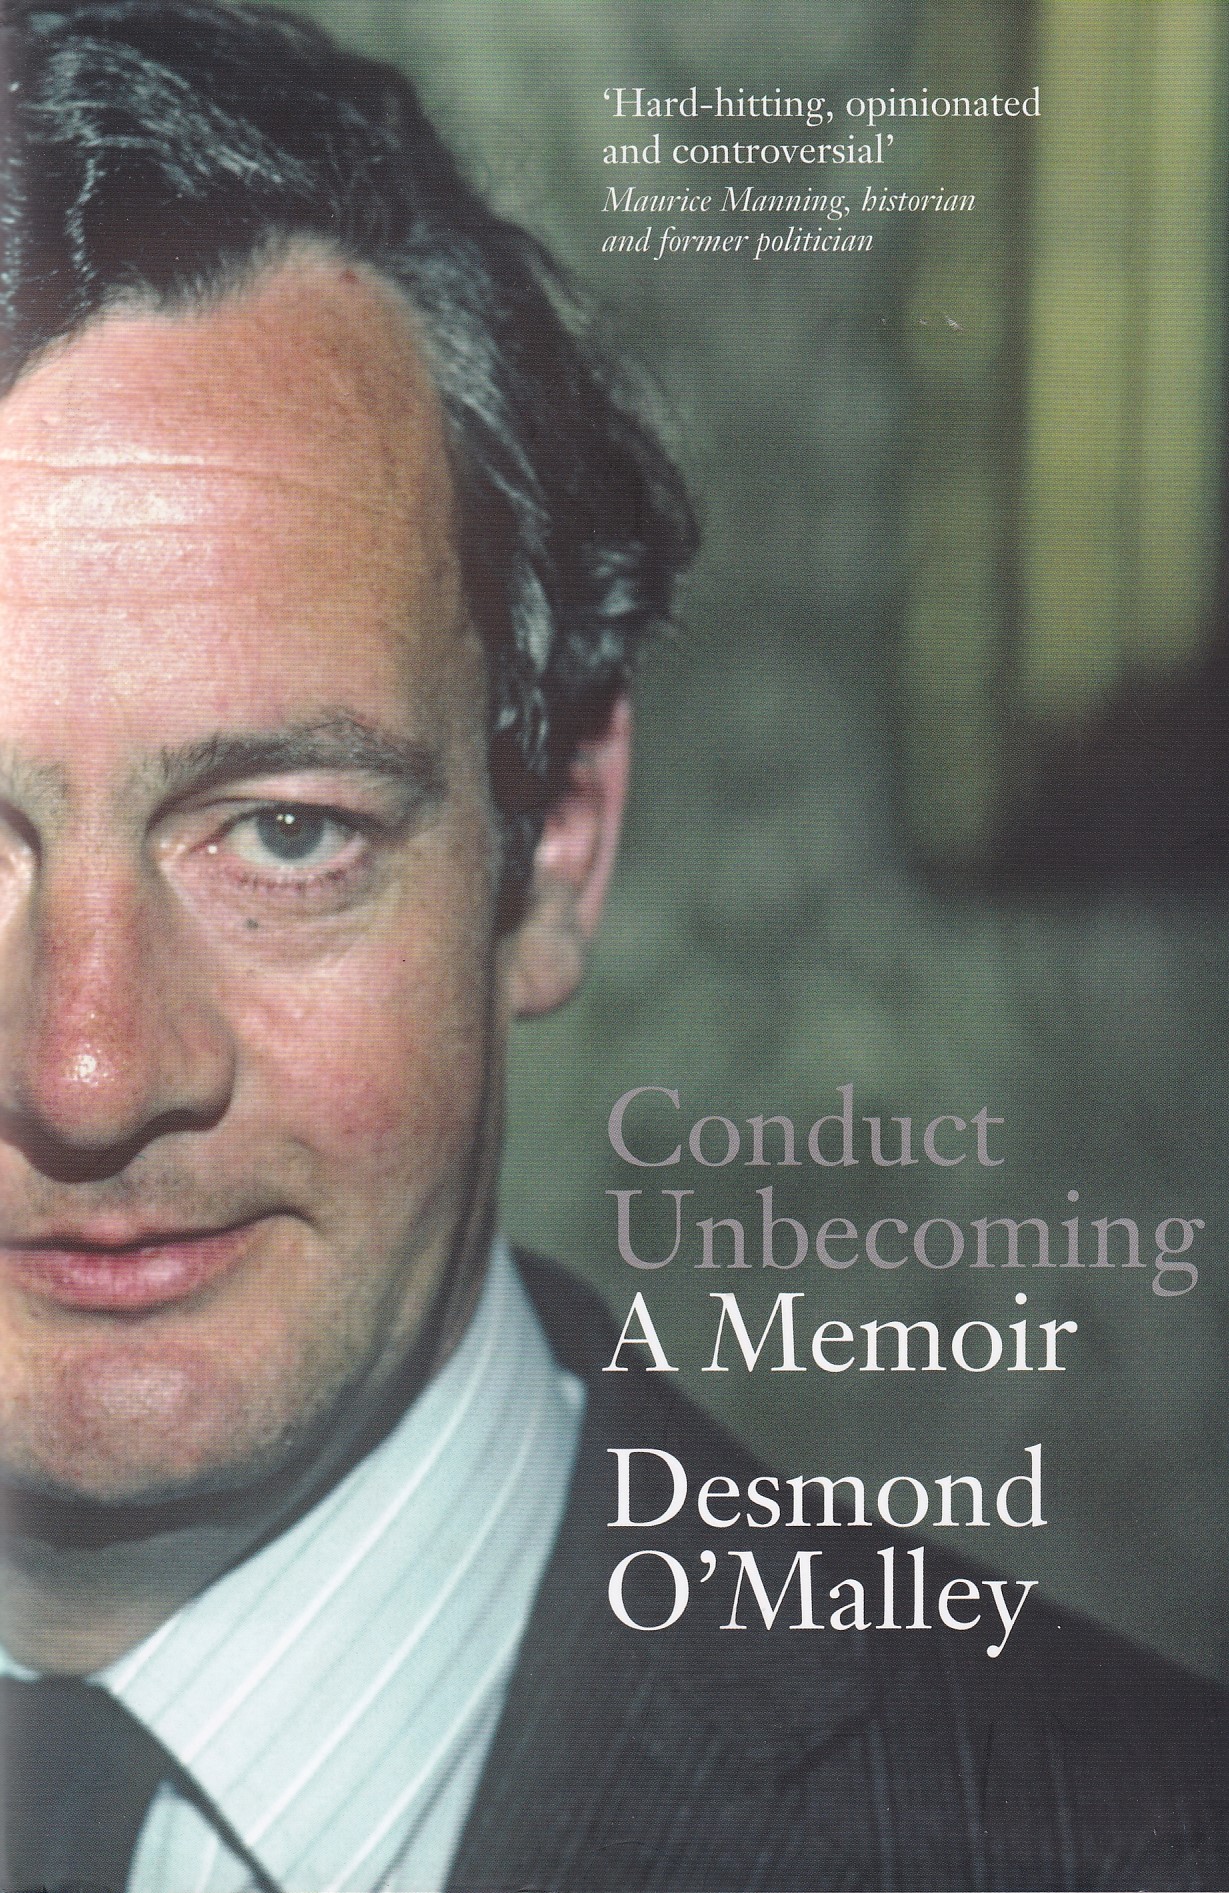 Conduct Unbecoming: A Memoir | Desmond O'Malley | Charlie Byrne's